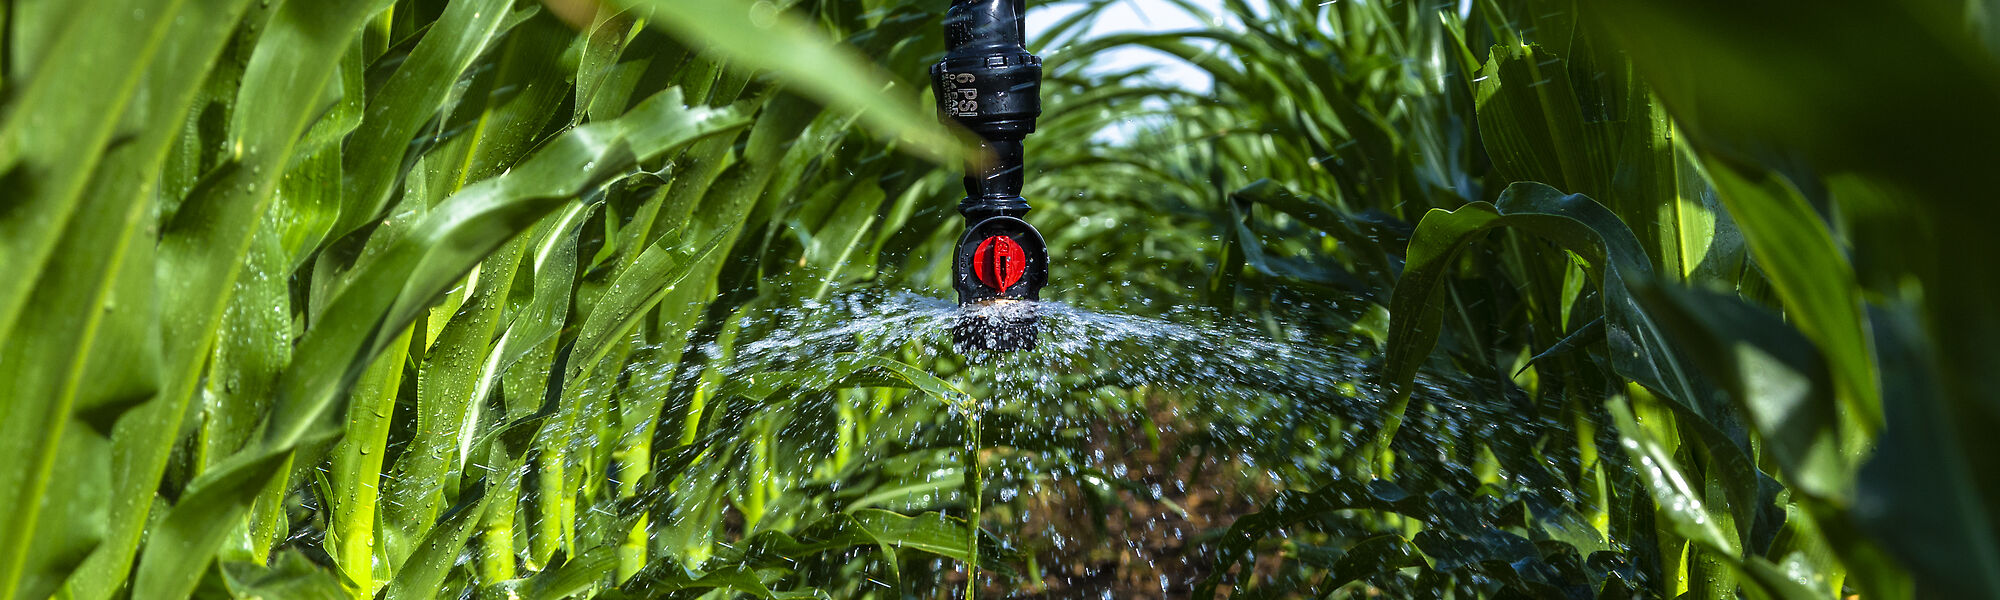 Low energy precision irrigation application system with the Nelson D3030 sprinkler